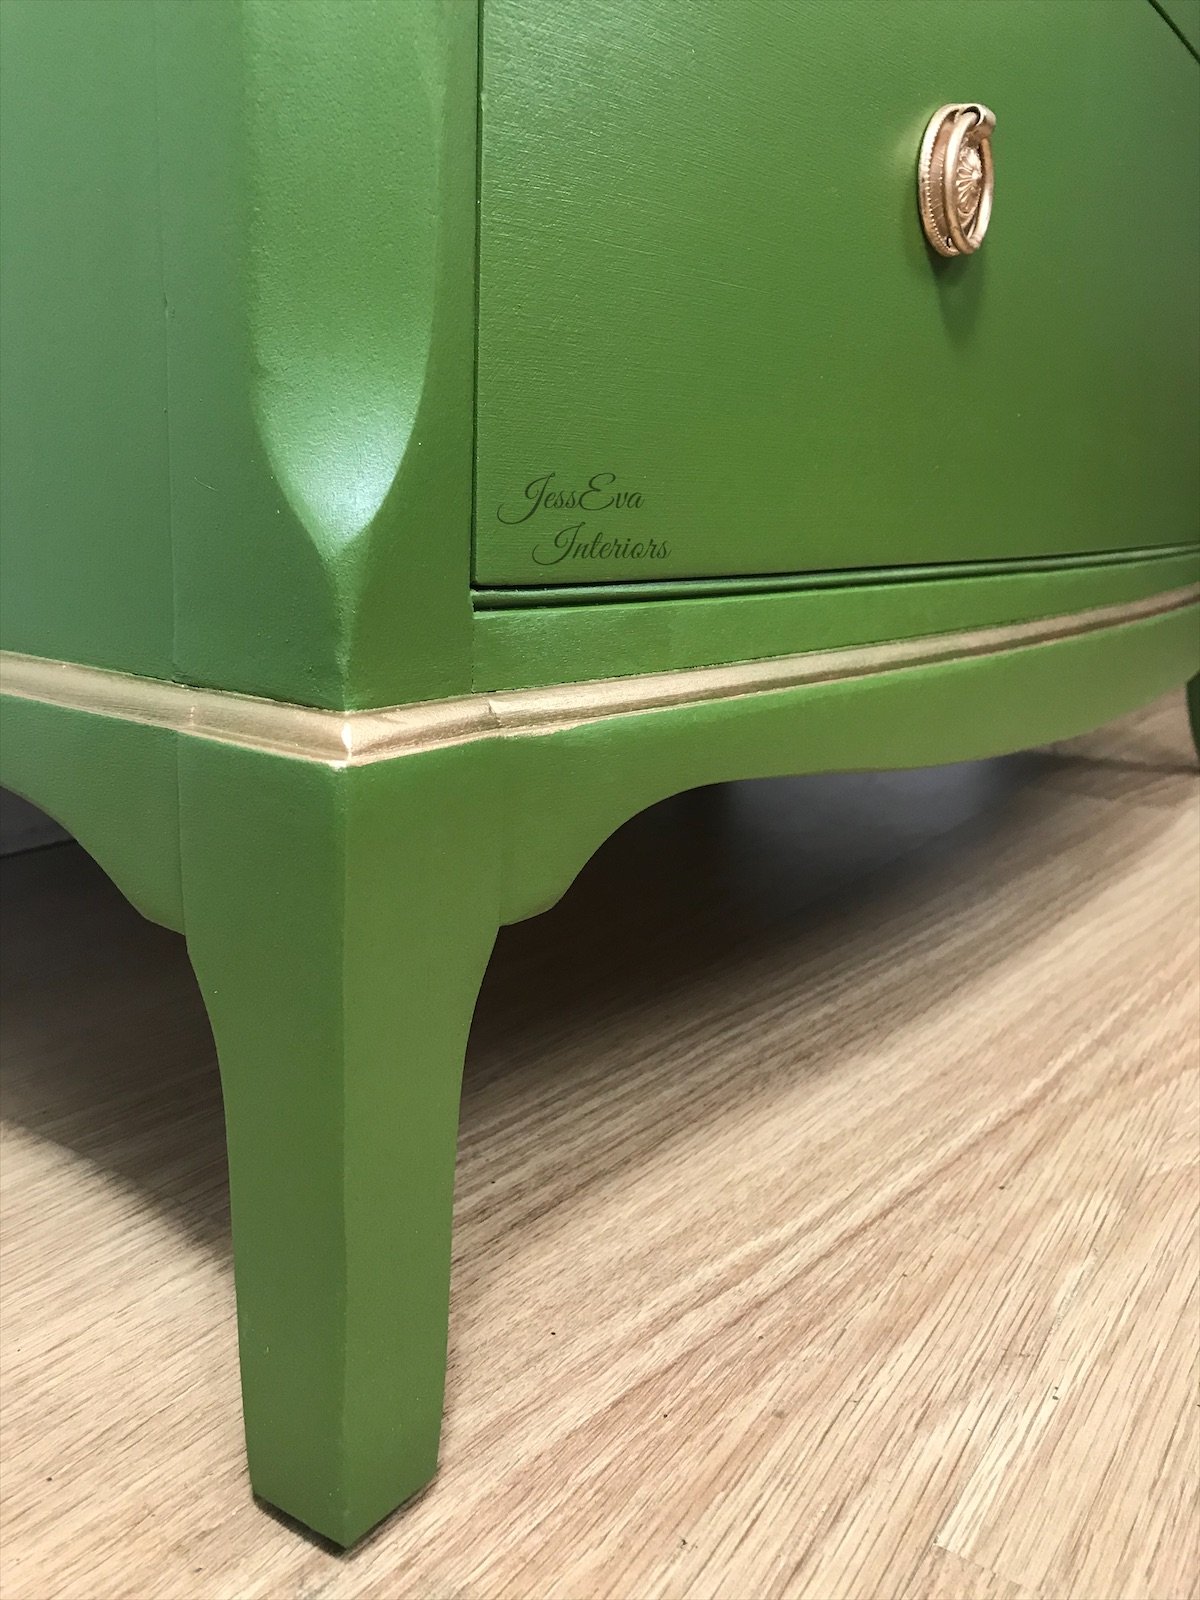 Vintage Strongbow CHEST OF DRAWERS Painted in Jewel Beetle Green